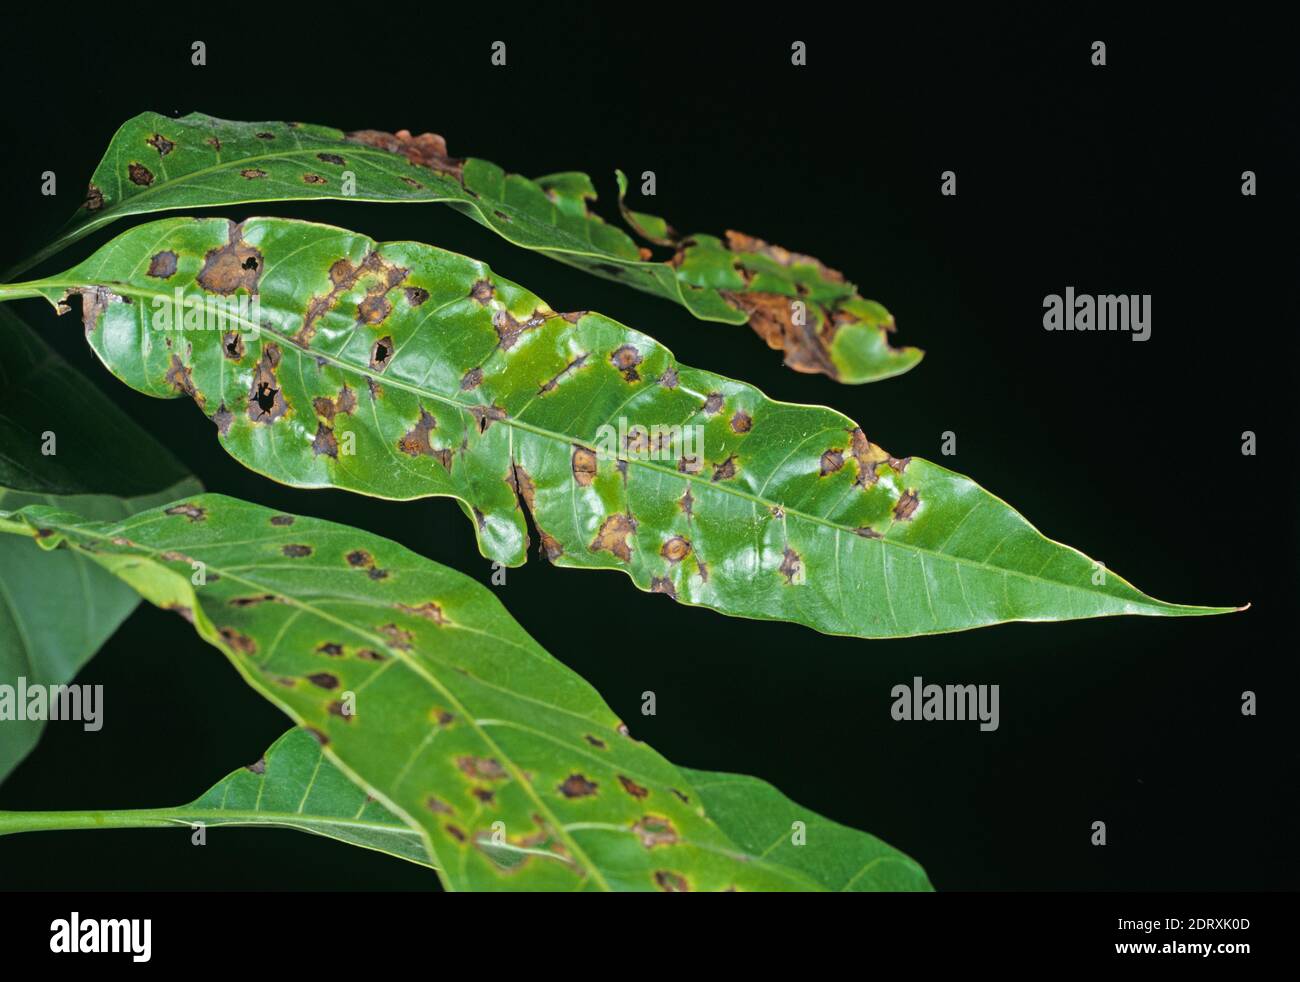 Black spot or anthracnose (Colletotrichum gloeospioroides) spotting lesions and damage to a mango tree leaf, Thailand Stock Photo